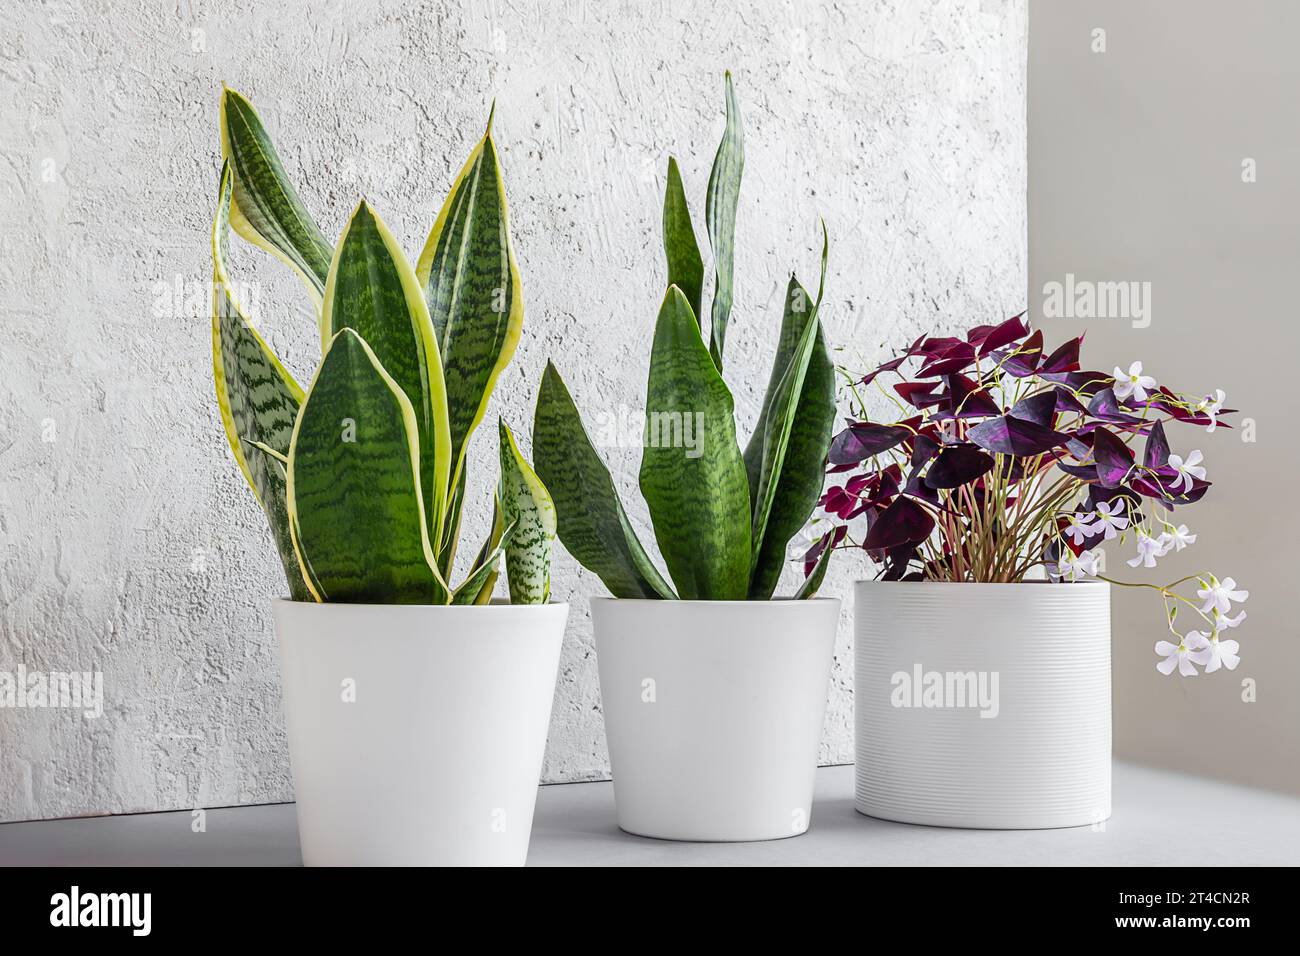 Sansevieria or snake plants and Oxalis triangularis in white ceramic pots, connecting with nature and indoor garden concept Stock Photo